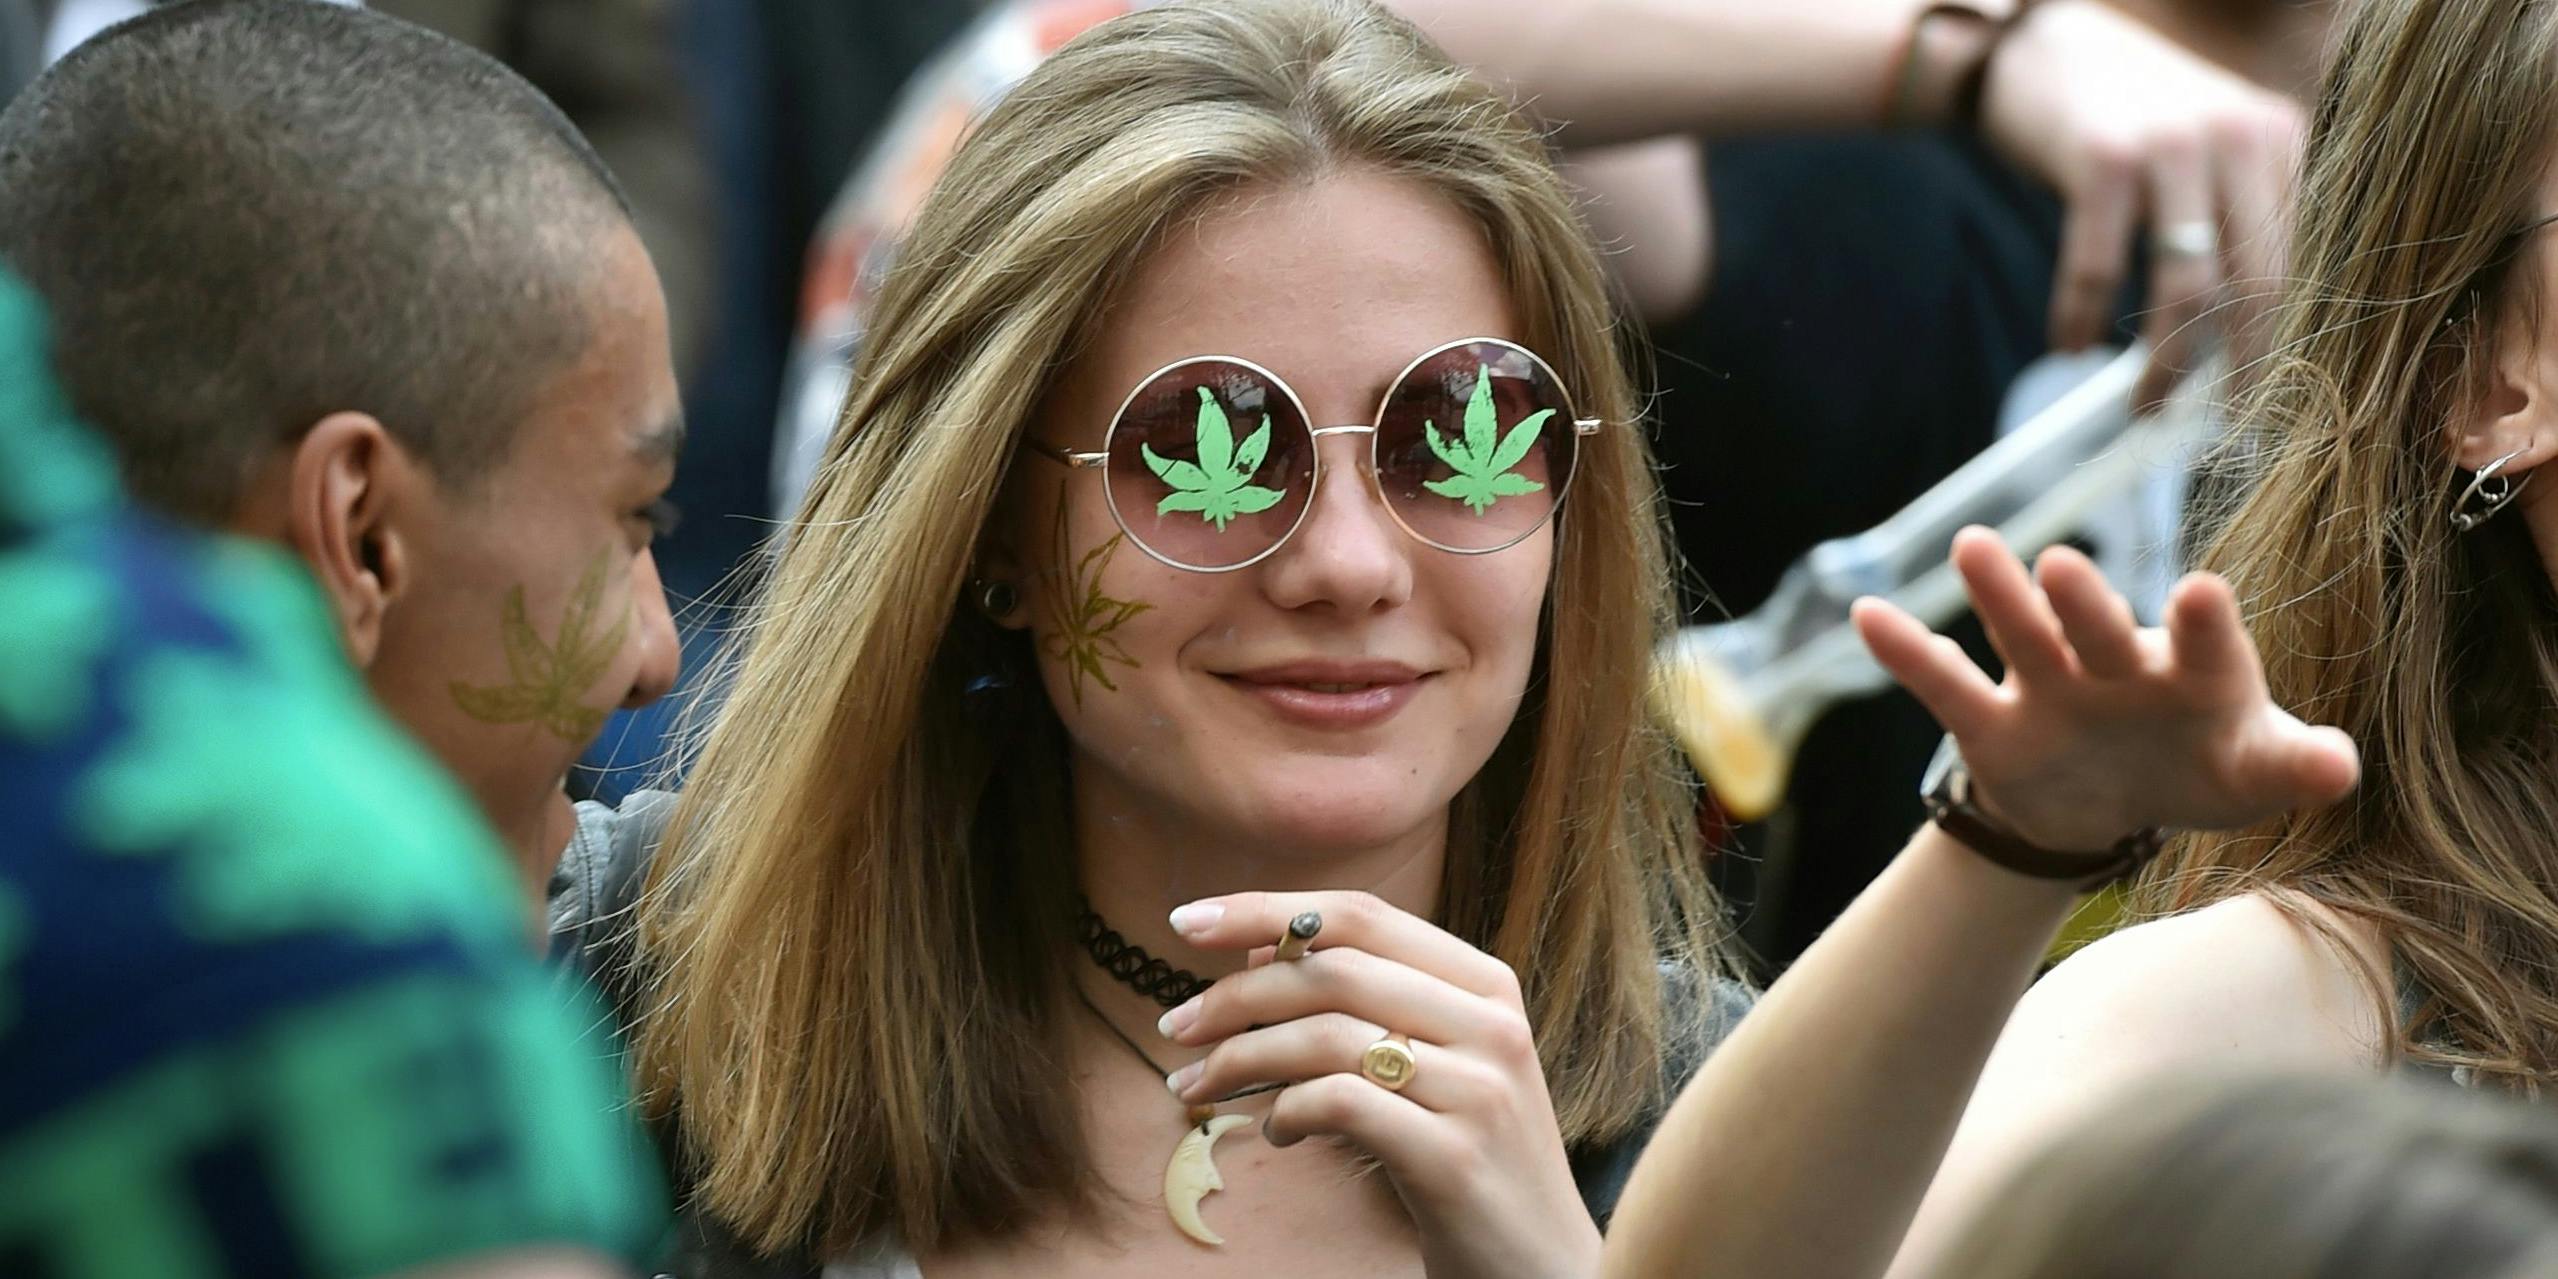 A young woman smokes in Paris on April 29, 2017, during the 16th annual Marche Mondiale du Cannabis to call for the legalization of cannabis. A recent survey found millennials smoke weed way more than their parents. (Photo by Alain Jocard/AFP via Getty images)